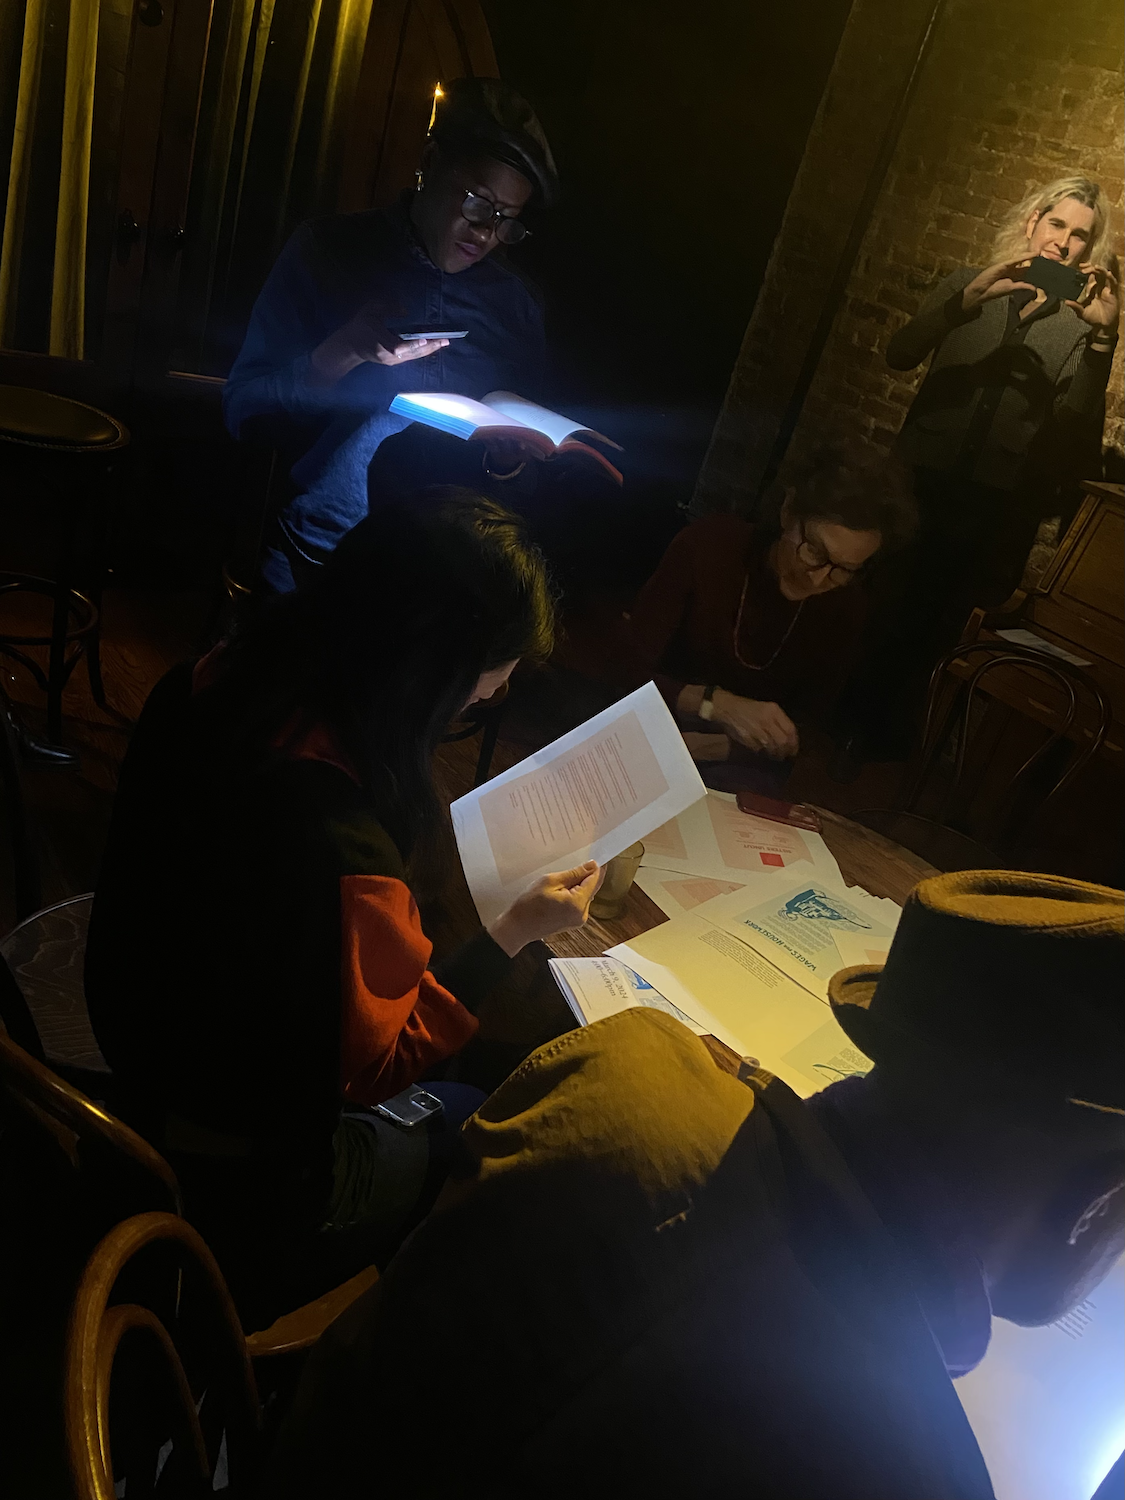 In the foreground are the backs of two people's heads who are looking at papers and farther away is a person in a dark cap with glasses holding a phone flashlight to read from the book in their hand.